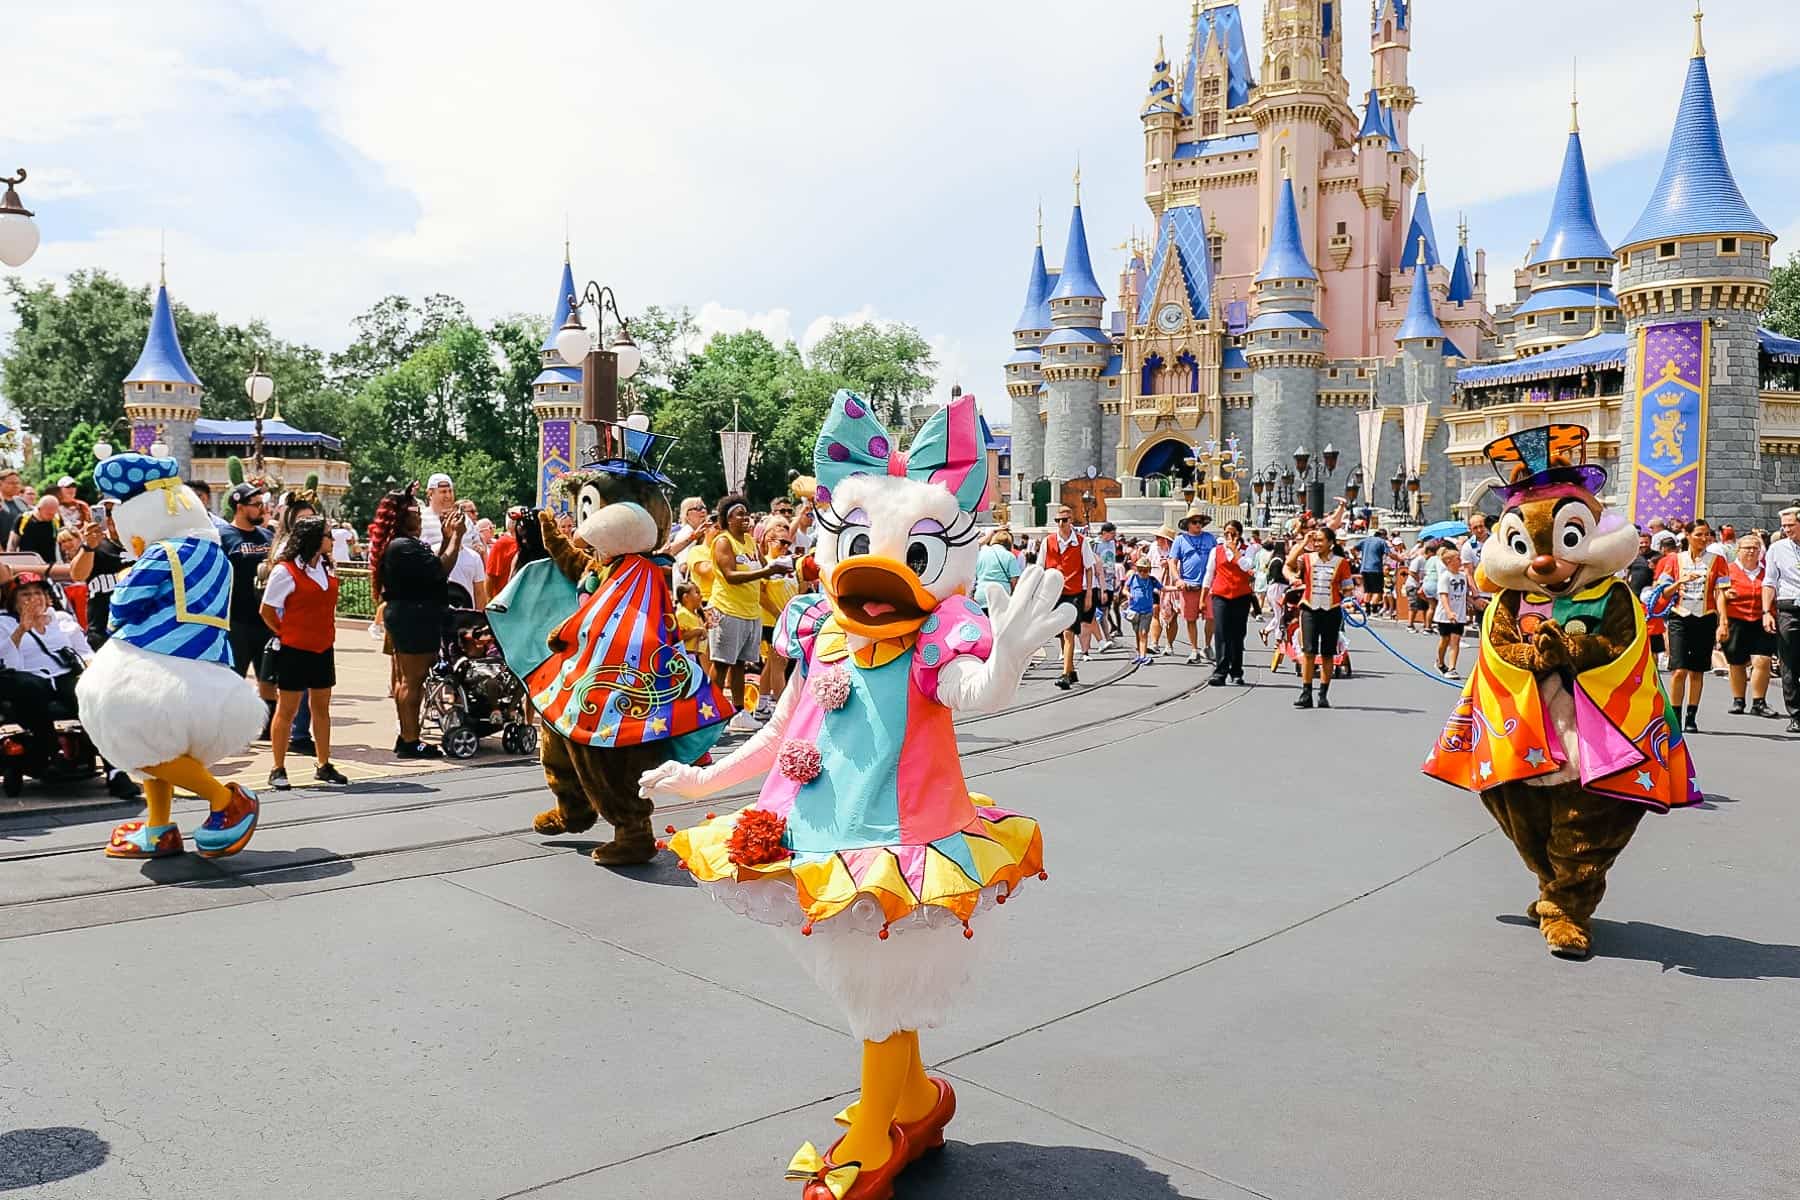 Chip and Dale walking in the Festival of Fantasy Parade 